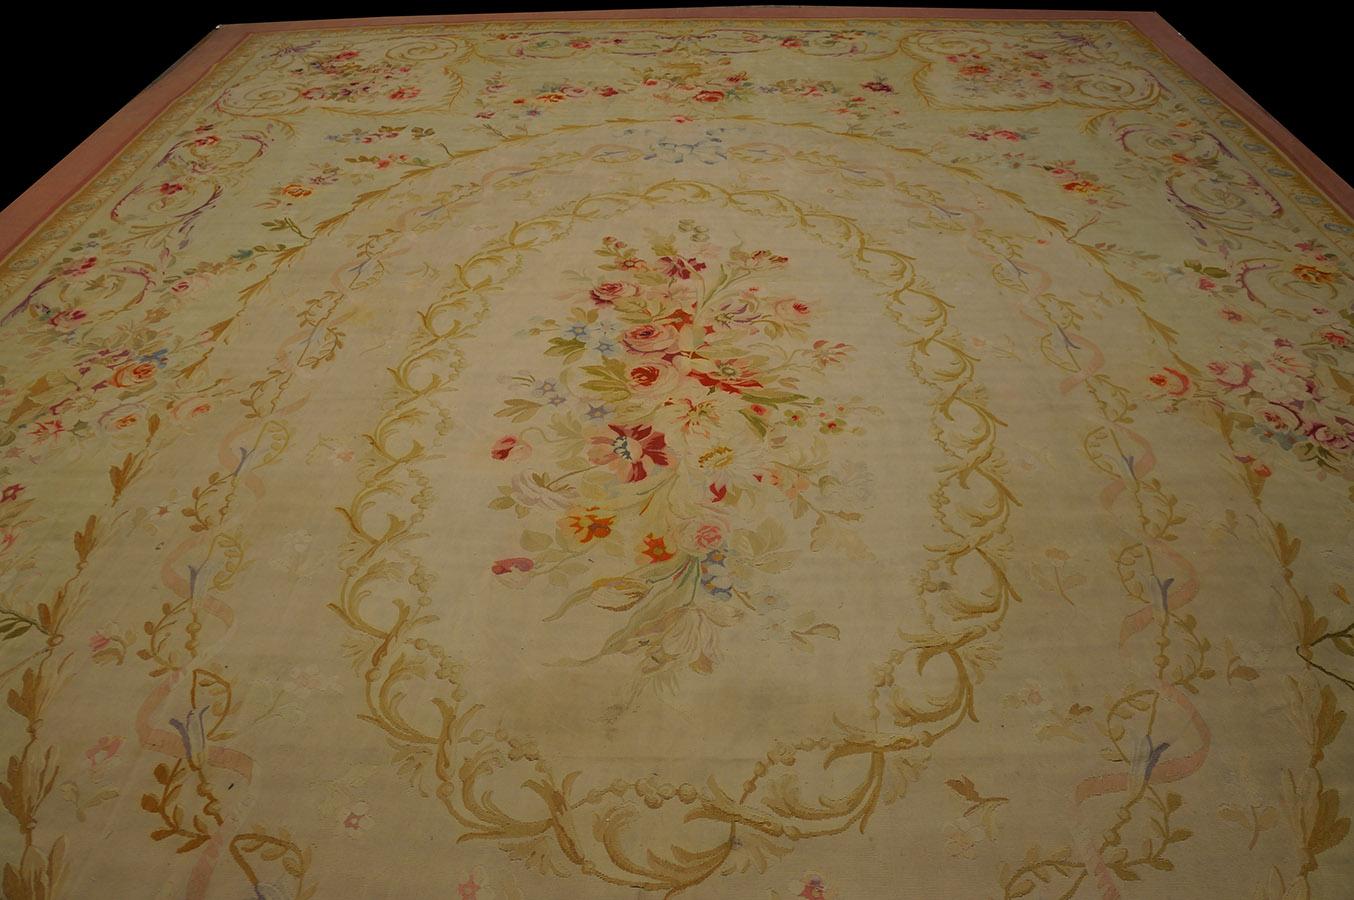 Early 20th Century French Aubusson Carpet ( 14'5' x 20'9'' - 440 x 633 ) 4